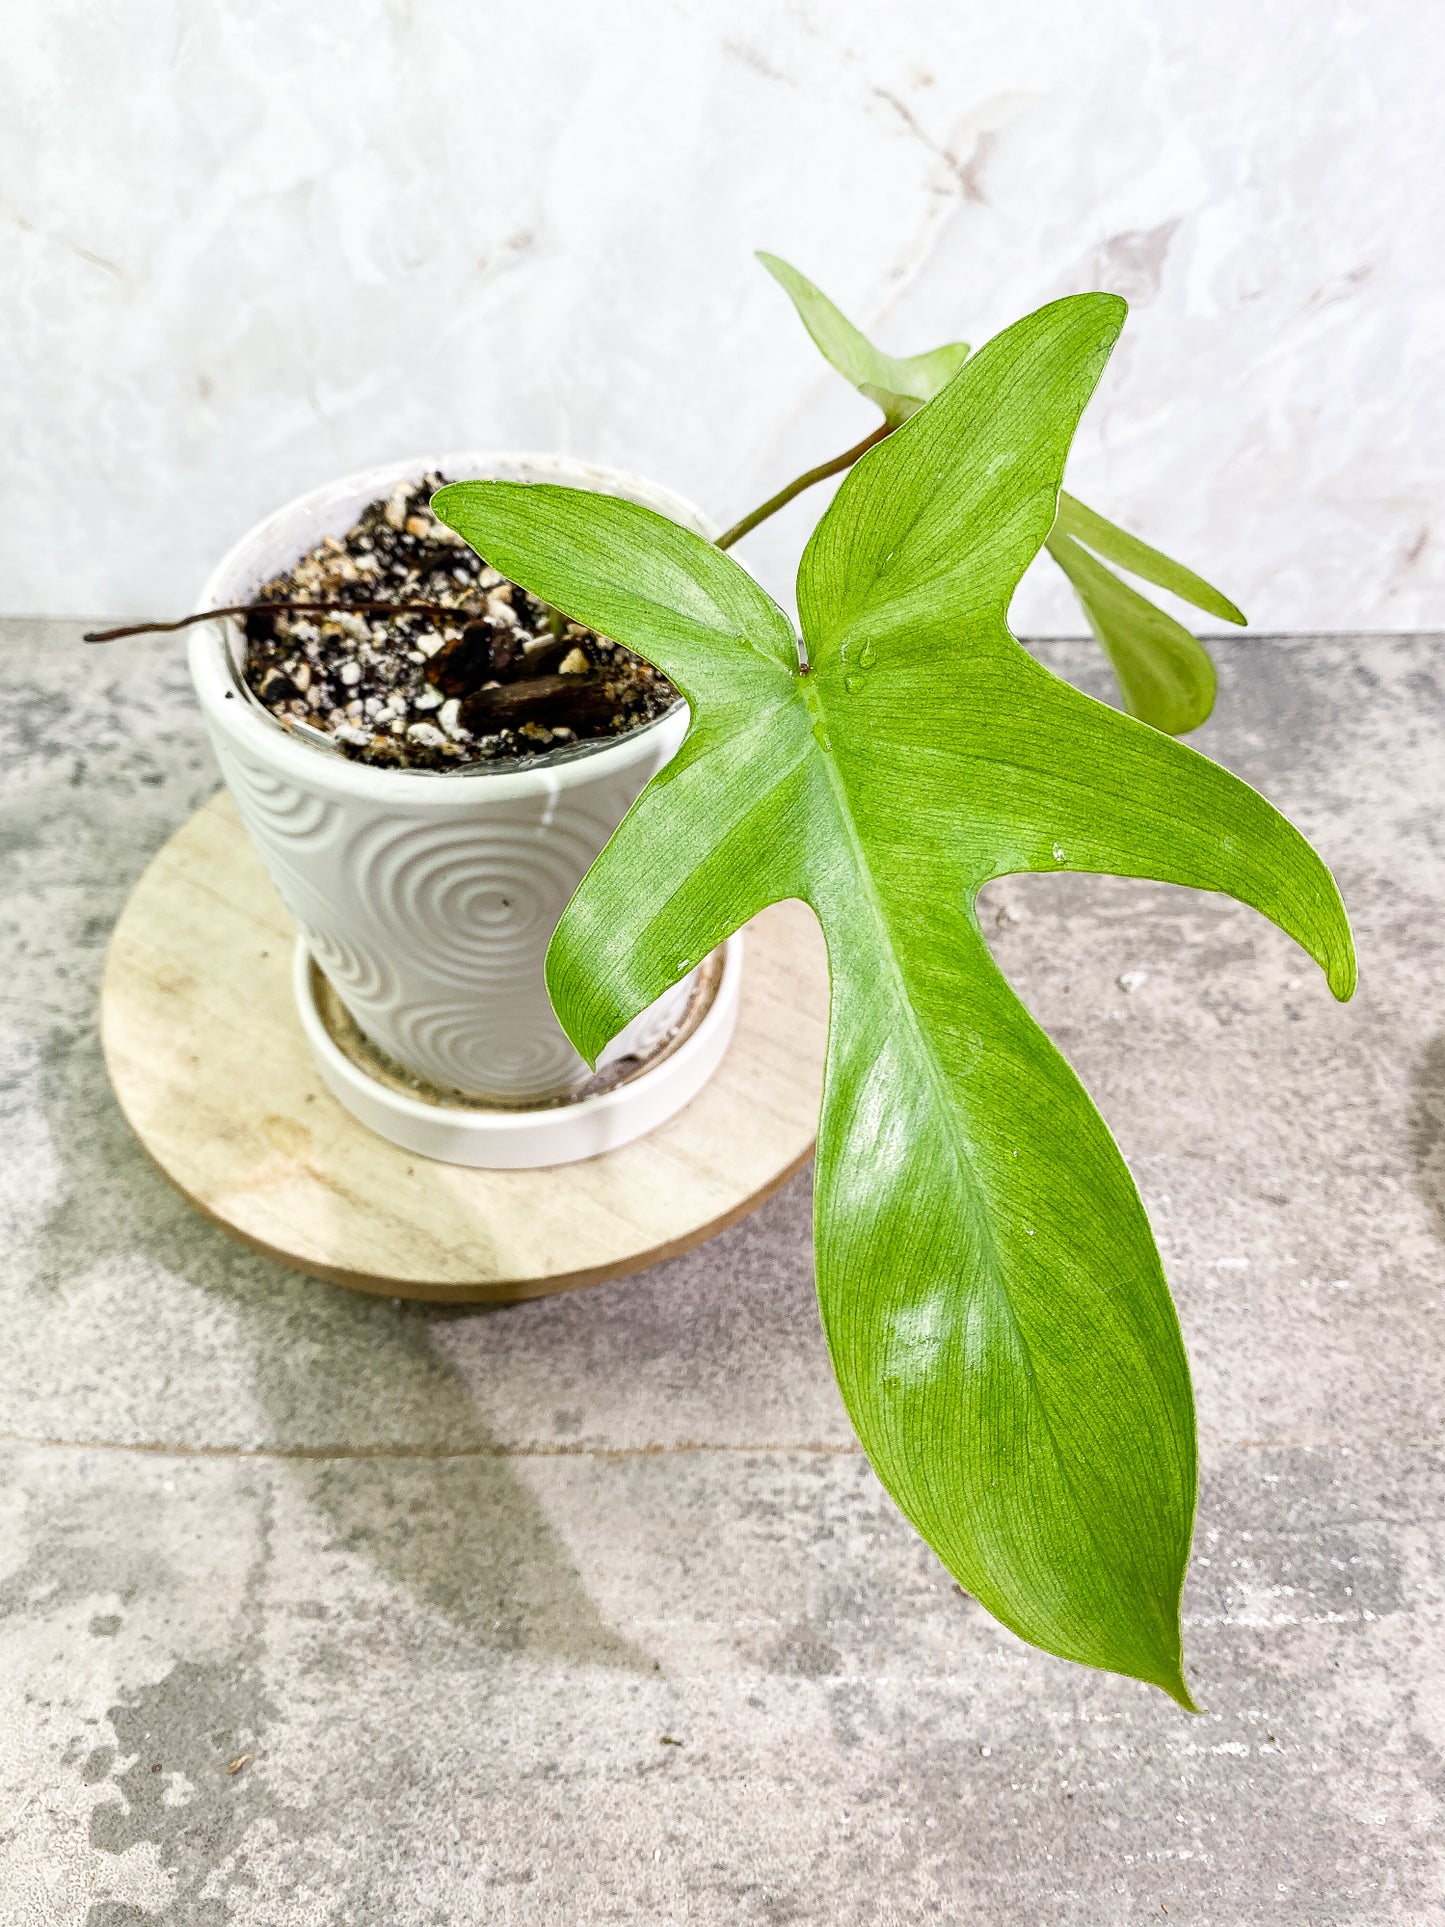 Philodendron Florida ghost mint 2 leaves 1 growing bud rooted